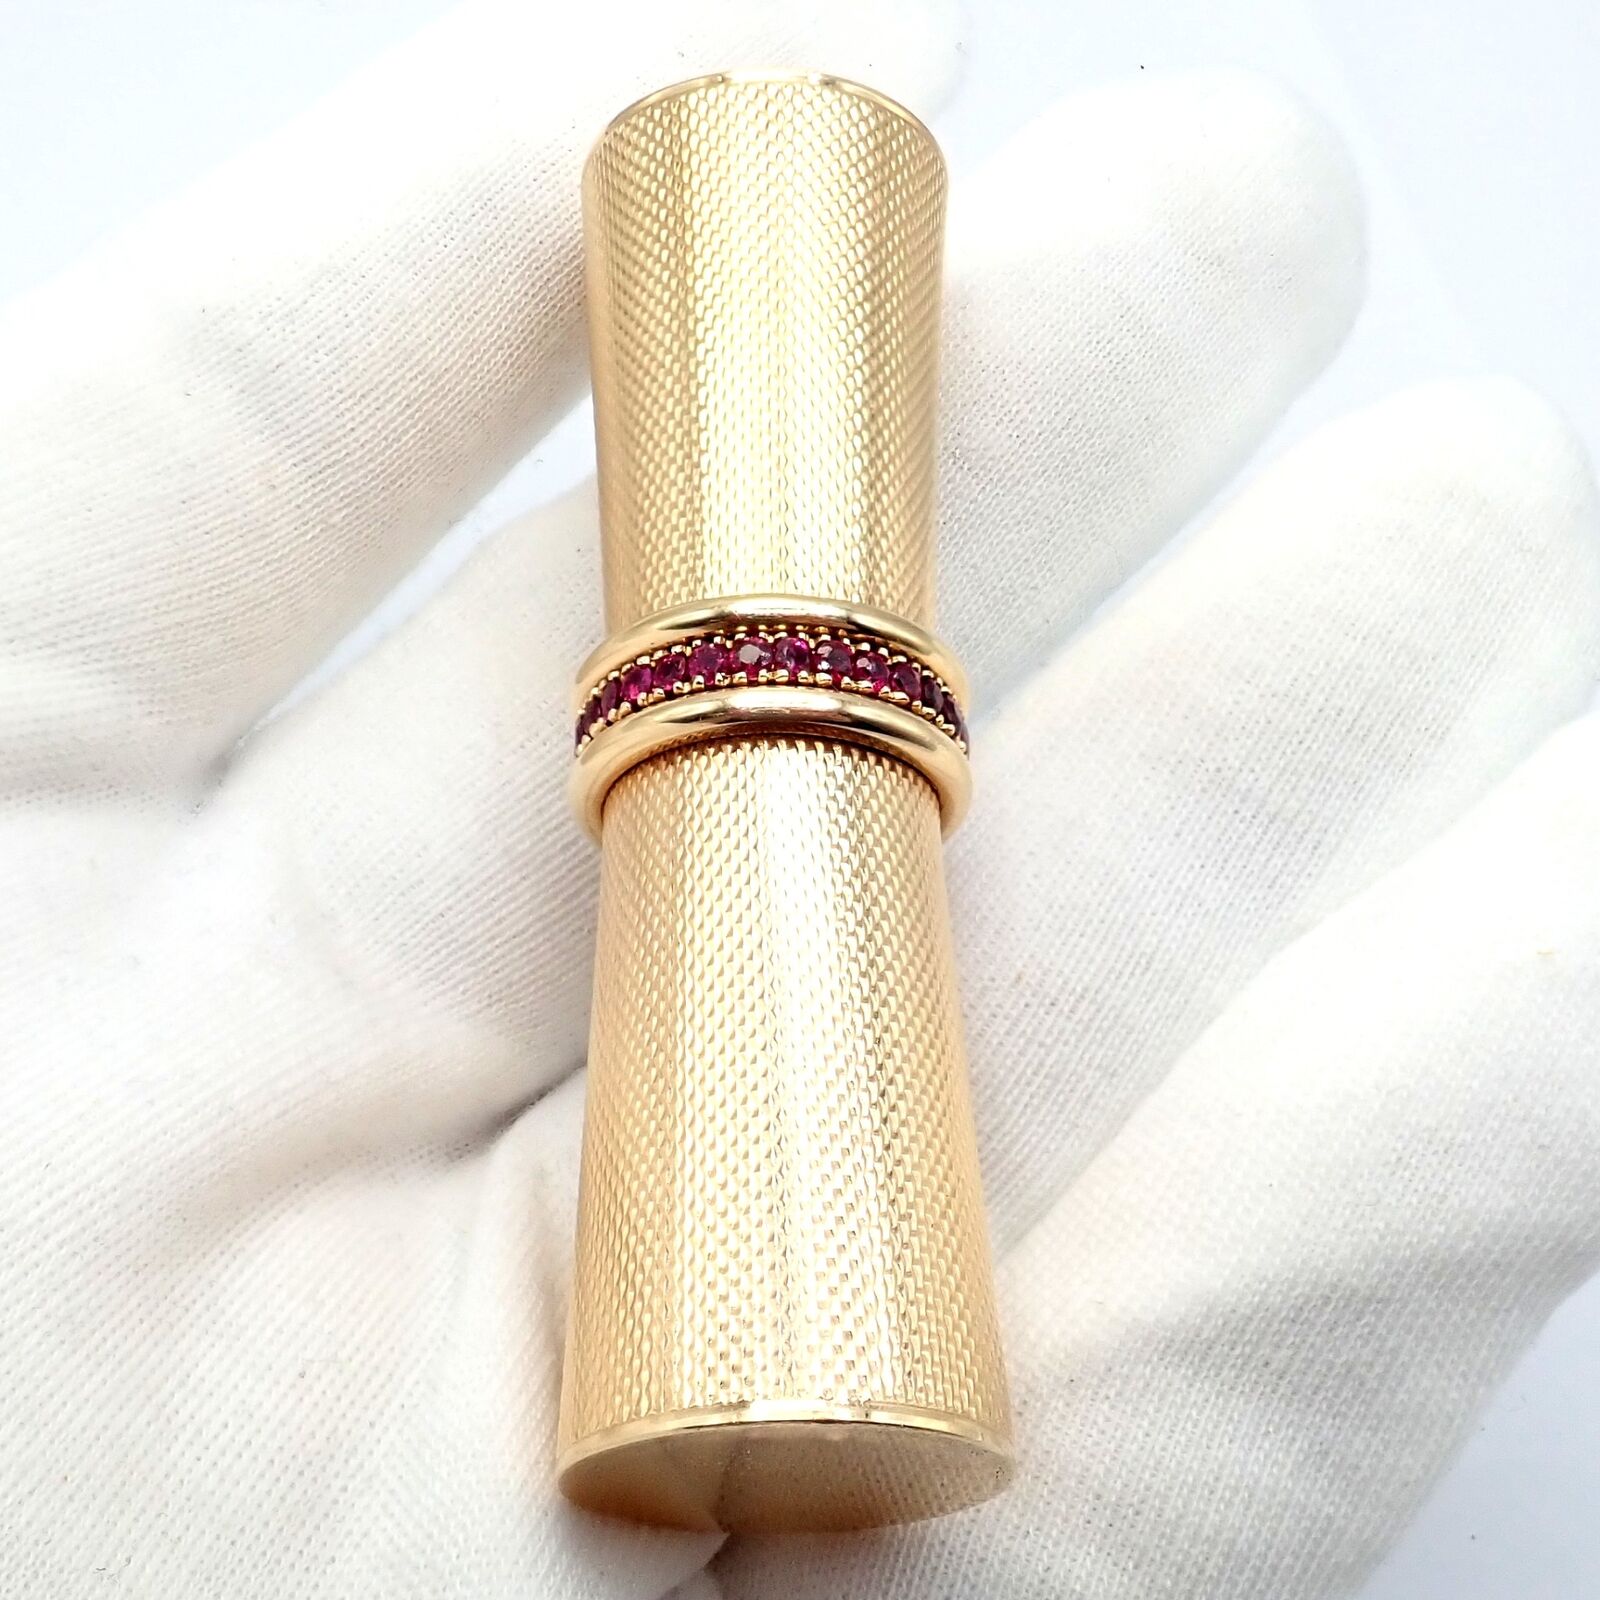 Fortrove Collectibles:Vanity, Perfume & Shaving:Lipstick Tubes, Holders Vintage Solid 14k Yellow Gold Van Cleef & Arpels Ruby Lipstick Case Holder